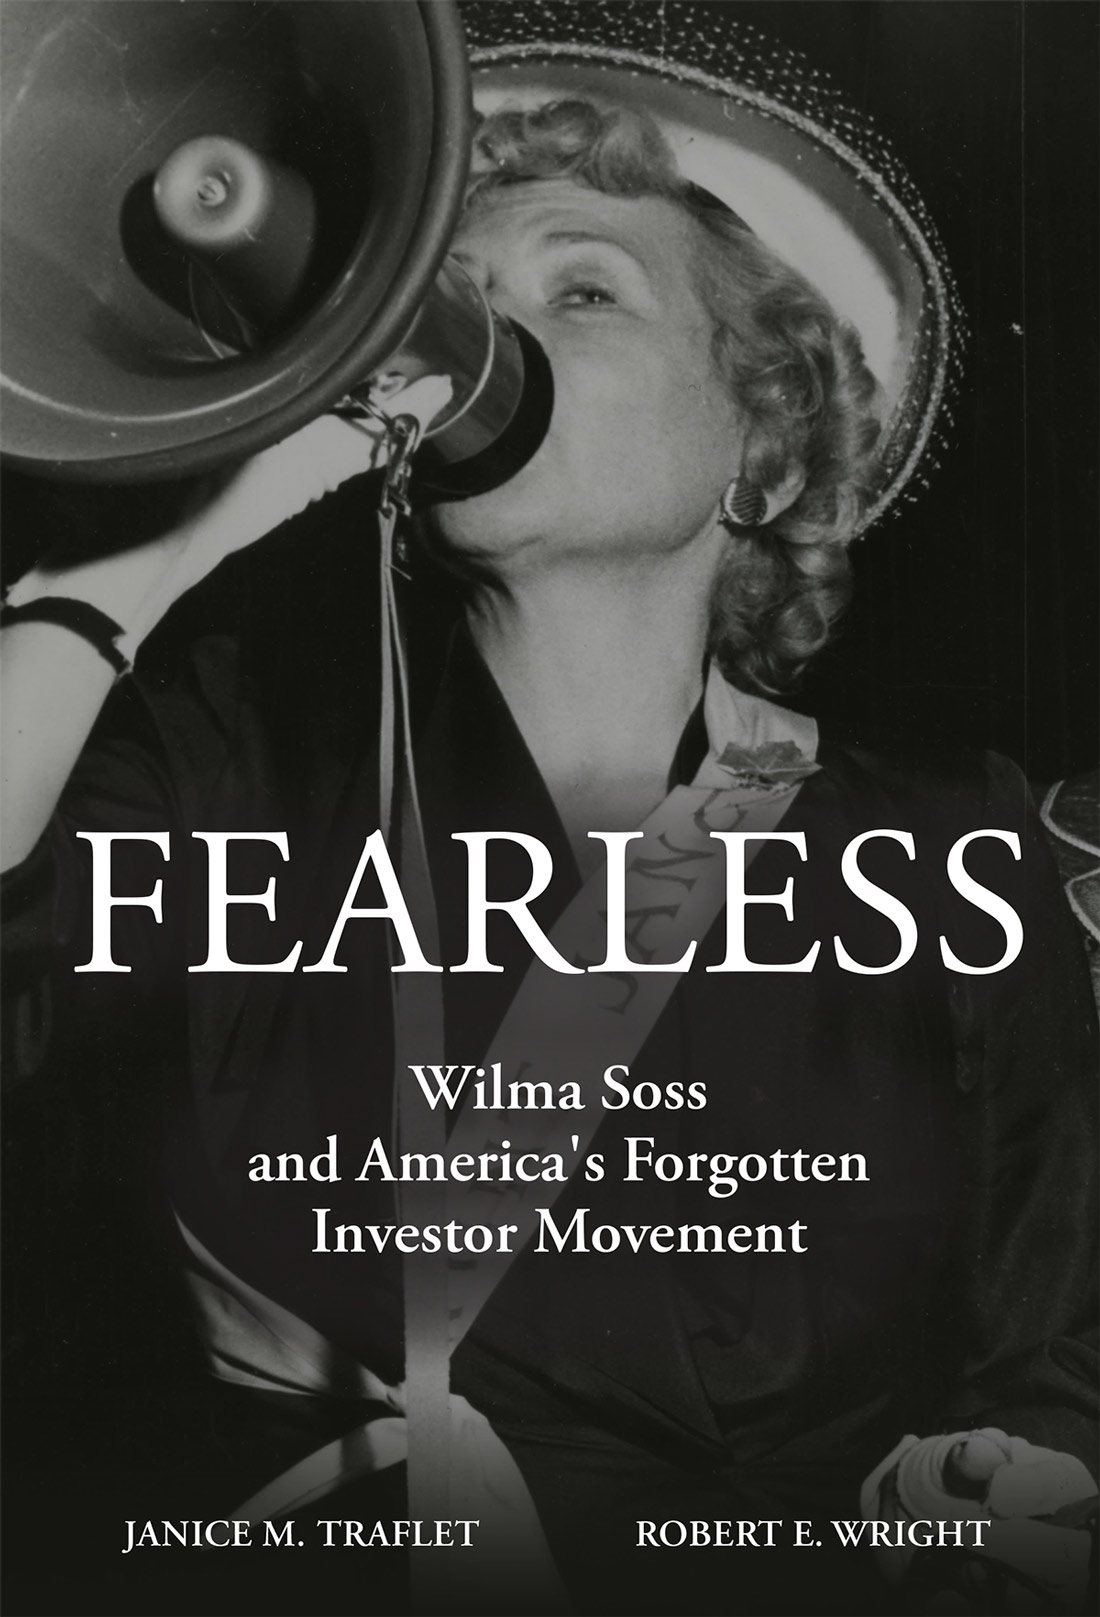 Cover of book "Fearless: Wilma Soss and America’s Forgotten Investor Movement"